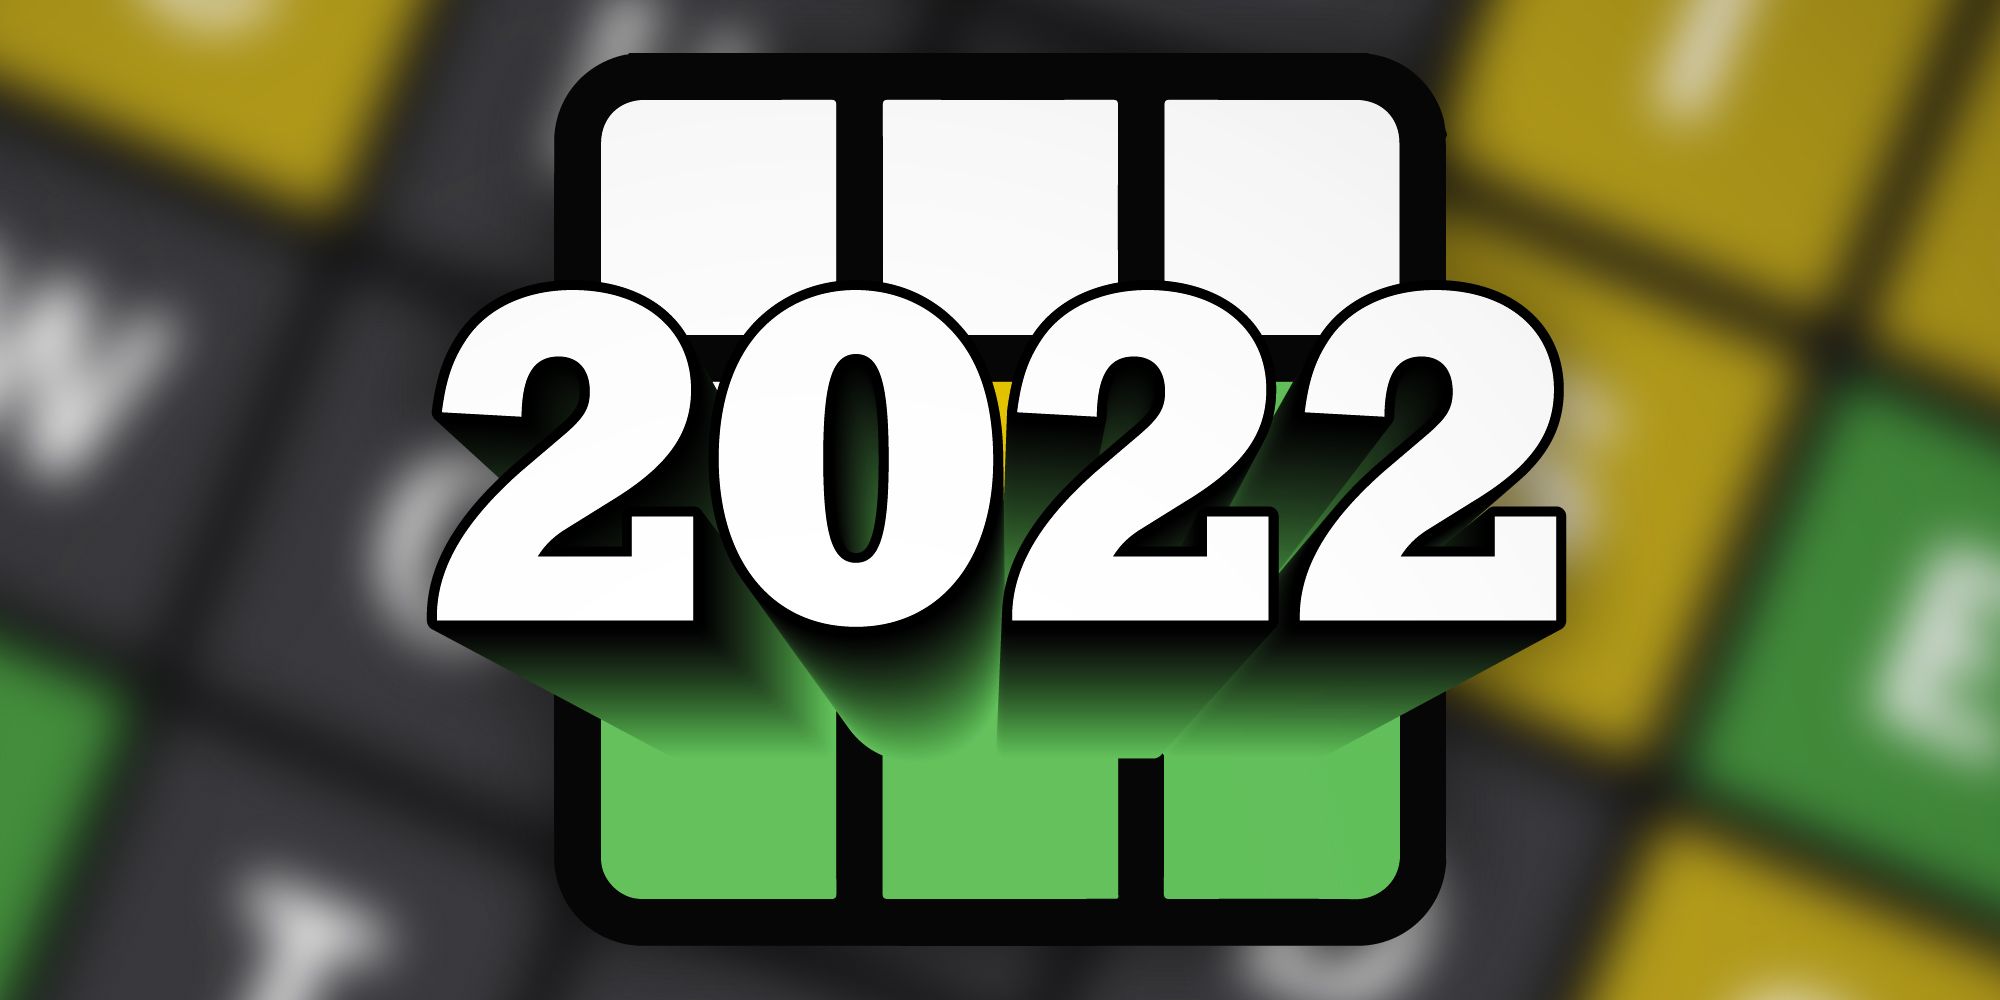 The word "2022" in big letters with wordle-like boxes in the background